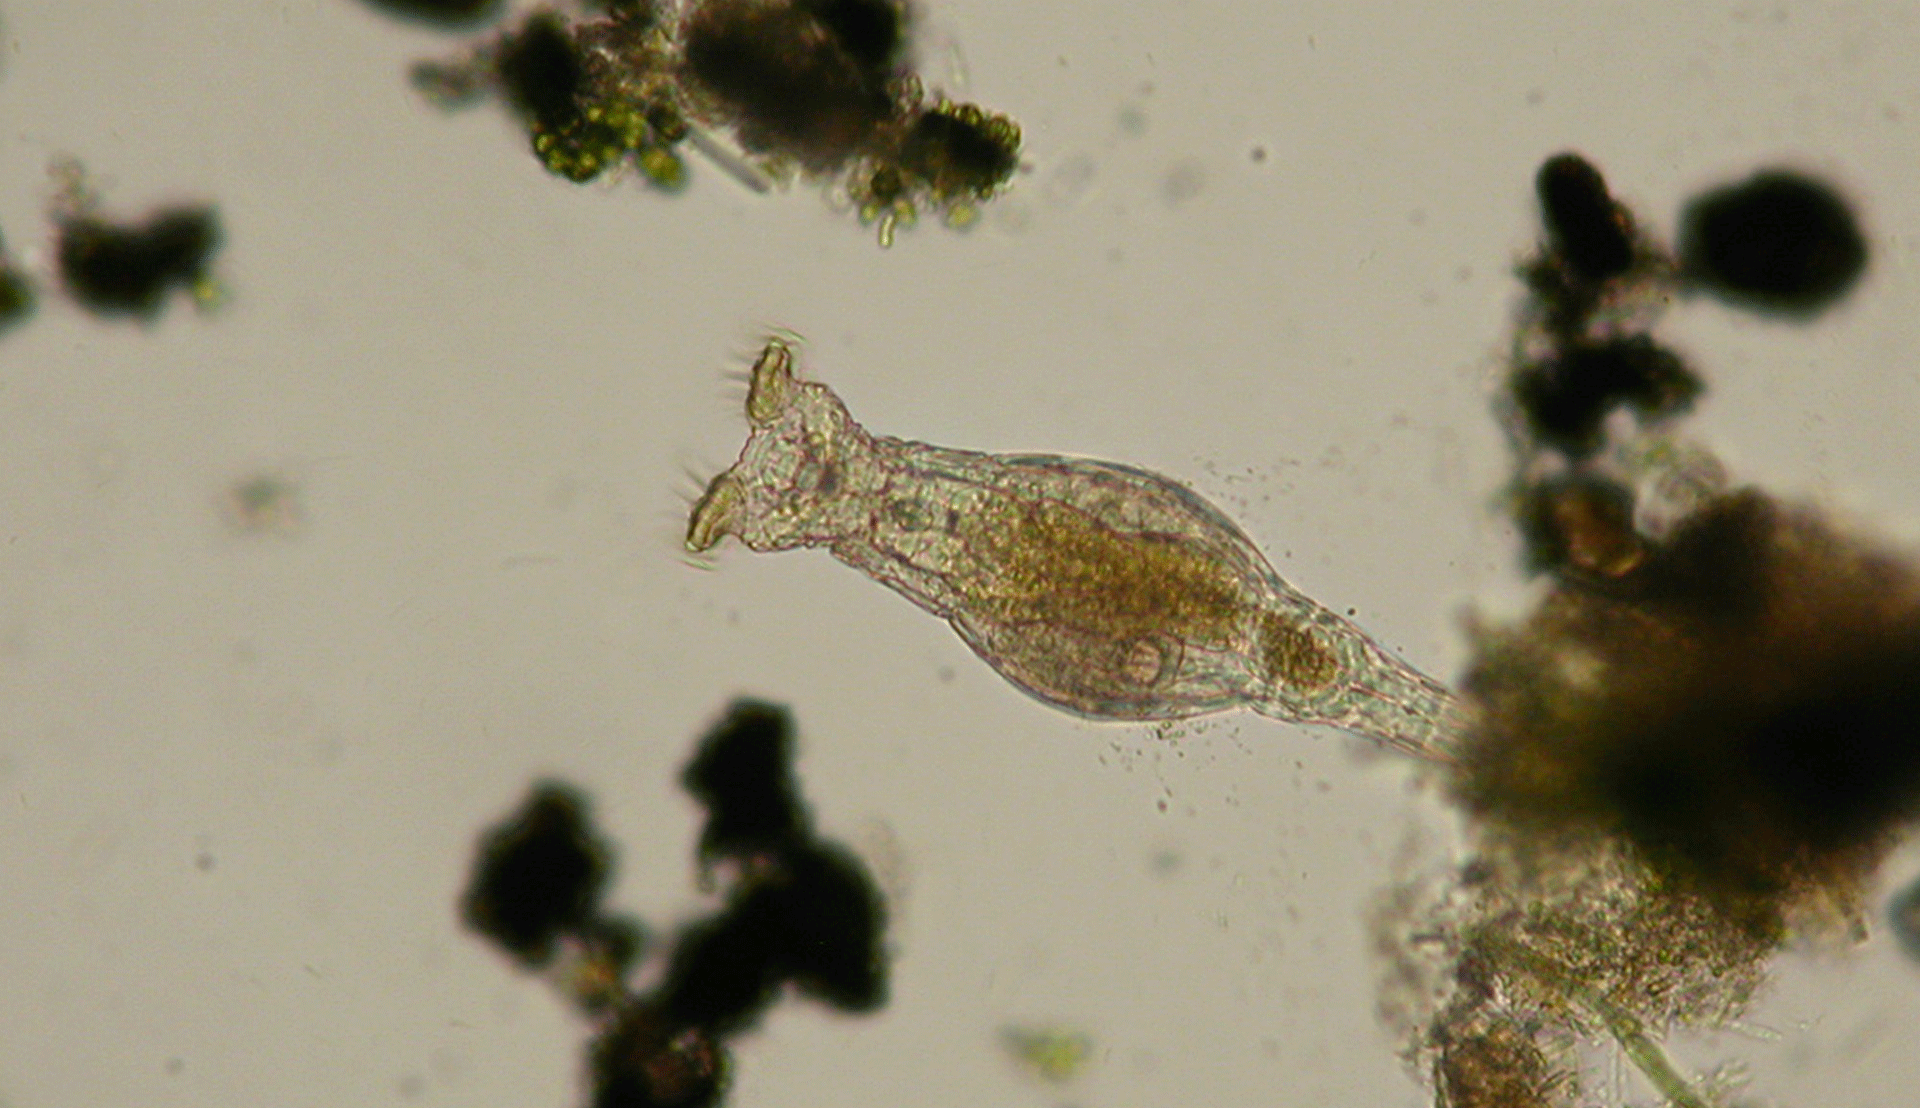 Rutgers Global - Serendipitous Science, Daniel Shain and team from Iceland discovers bdelloid rotifers in glacier ice, microscopic enhancement of bdelloid rotifer